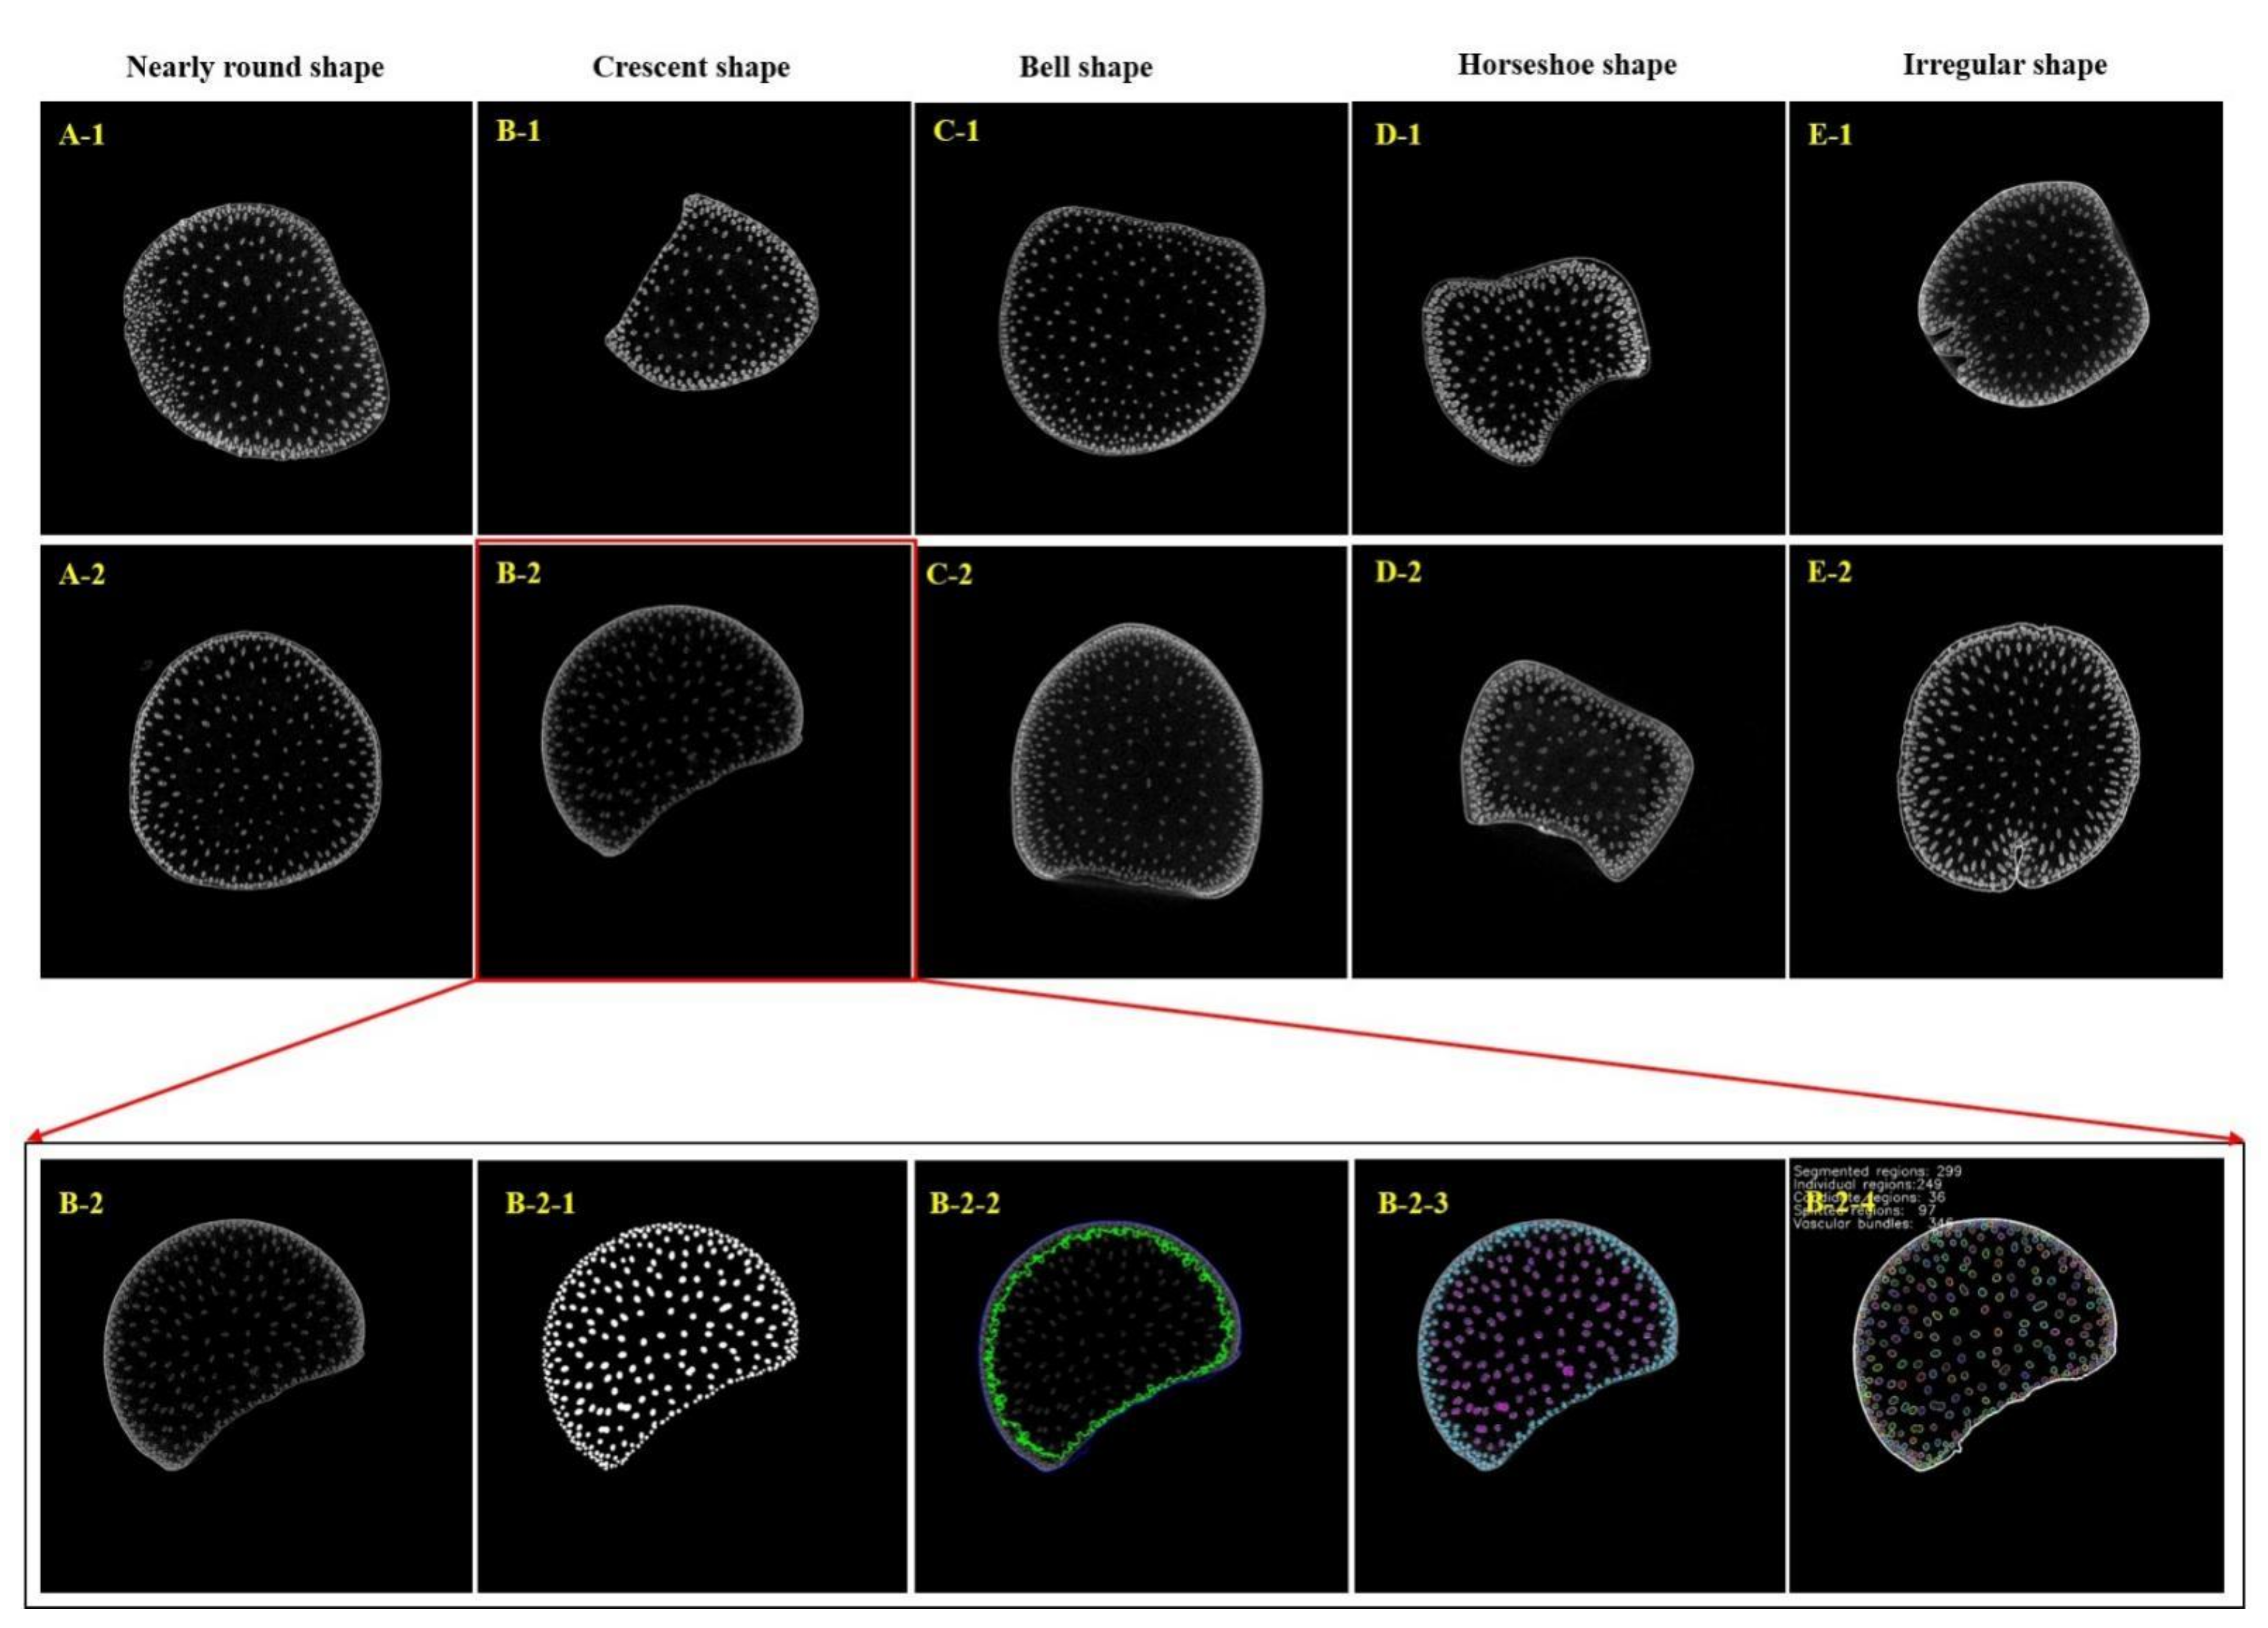 Plants Free Full Text High Throughput Phenotyping Accelerates The Dissection Of The Phenotypic Variation And Genetic Architecture Of Shank Vascular Bundles In Maize Zea Mays L Html